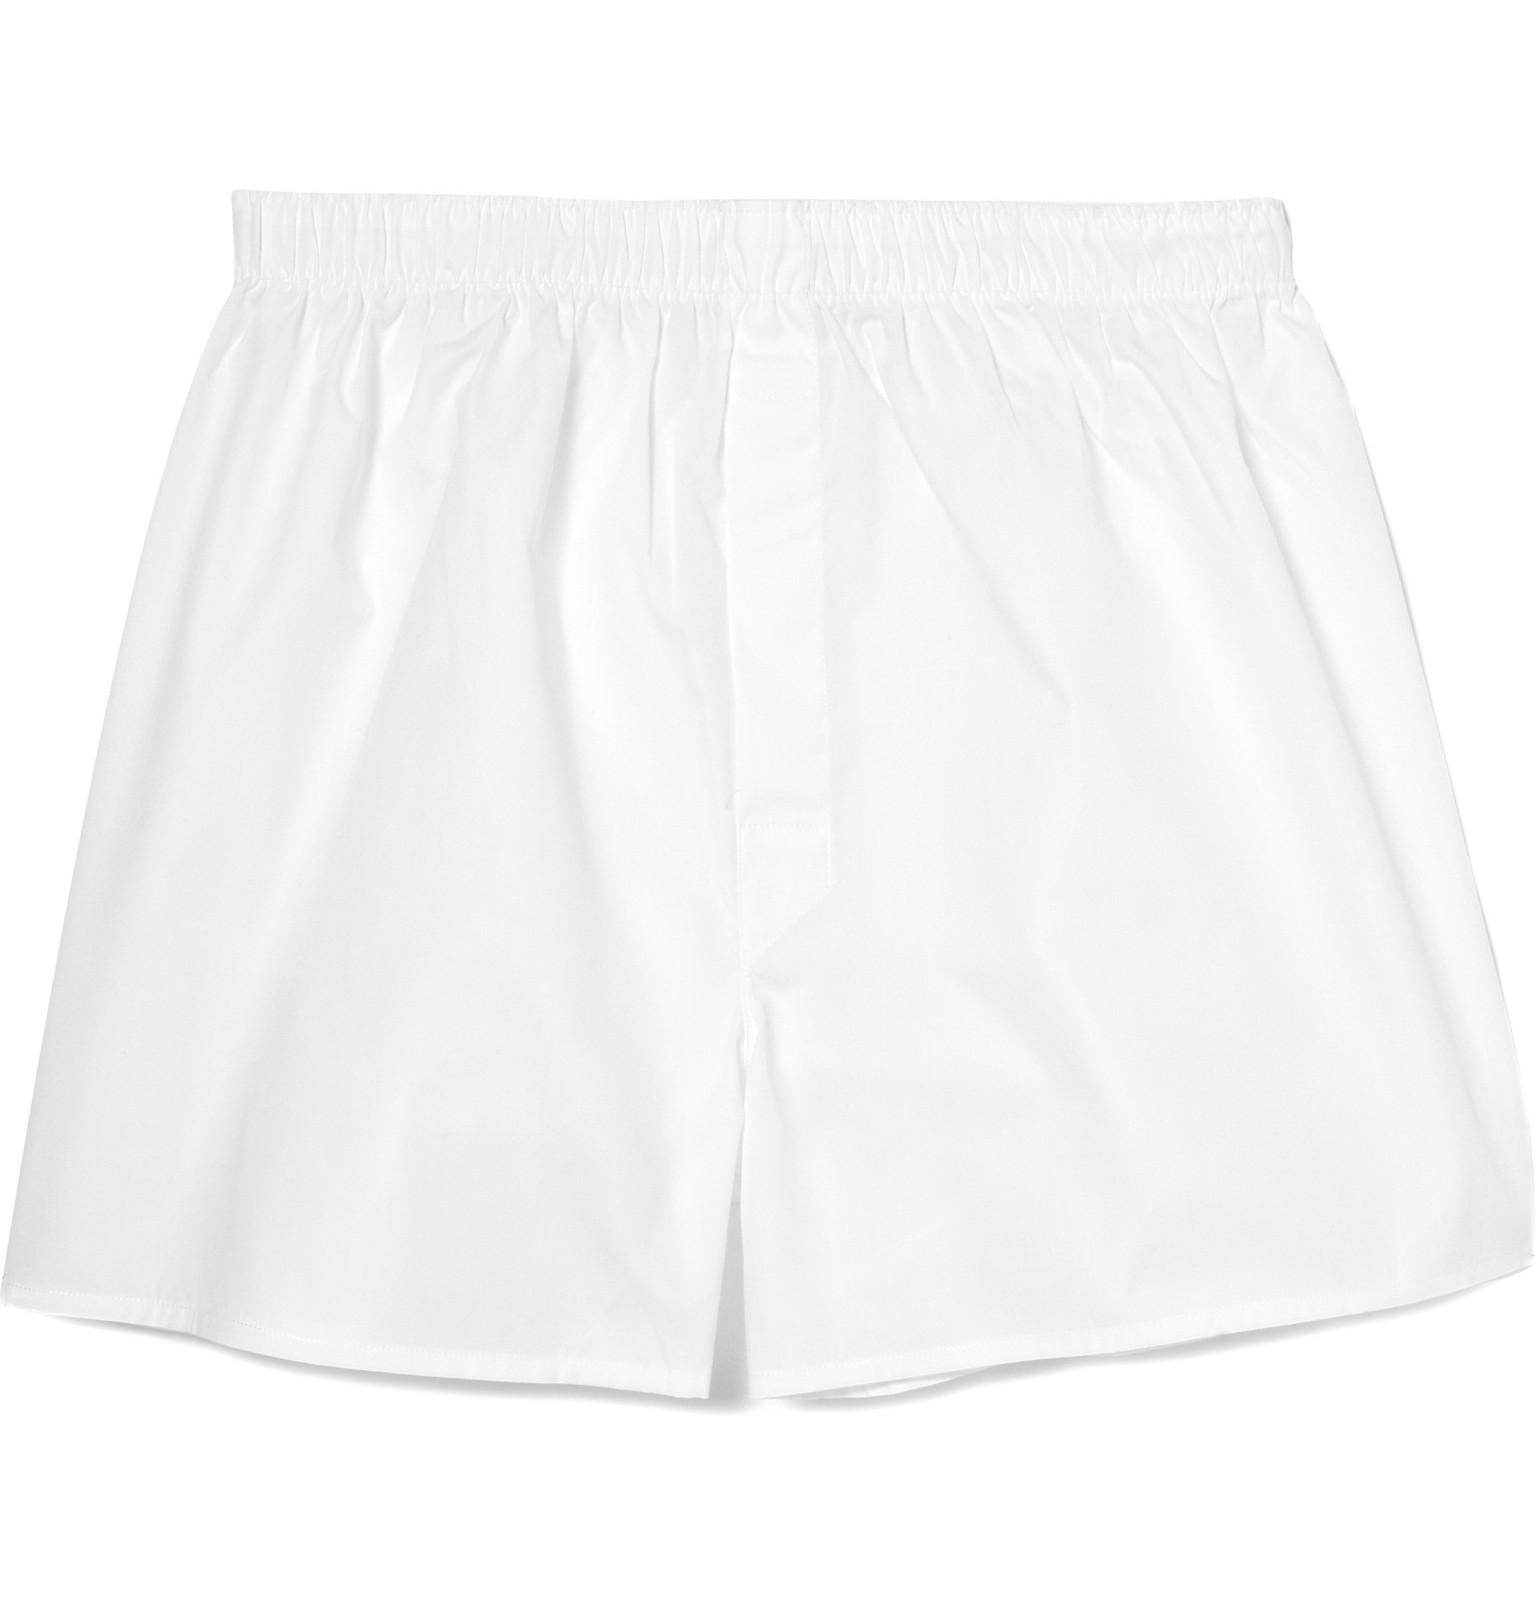 Sunspel Cotton Boxer Shorts in White for Men - Save 16% - Lyst